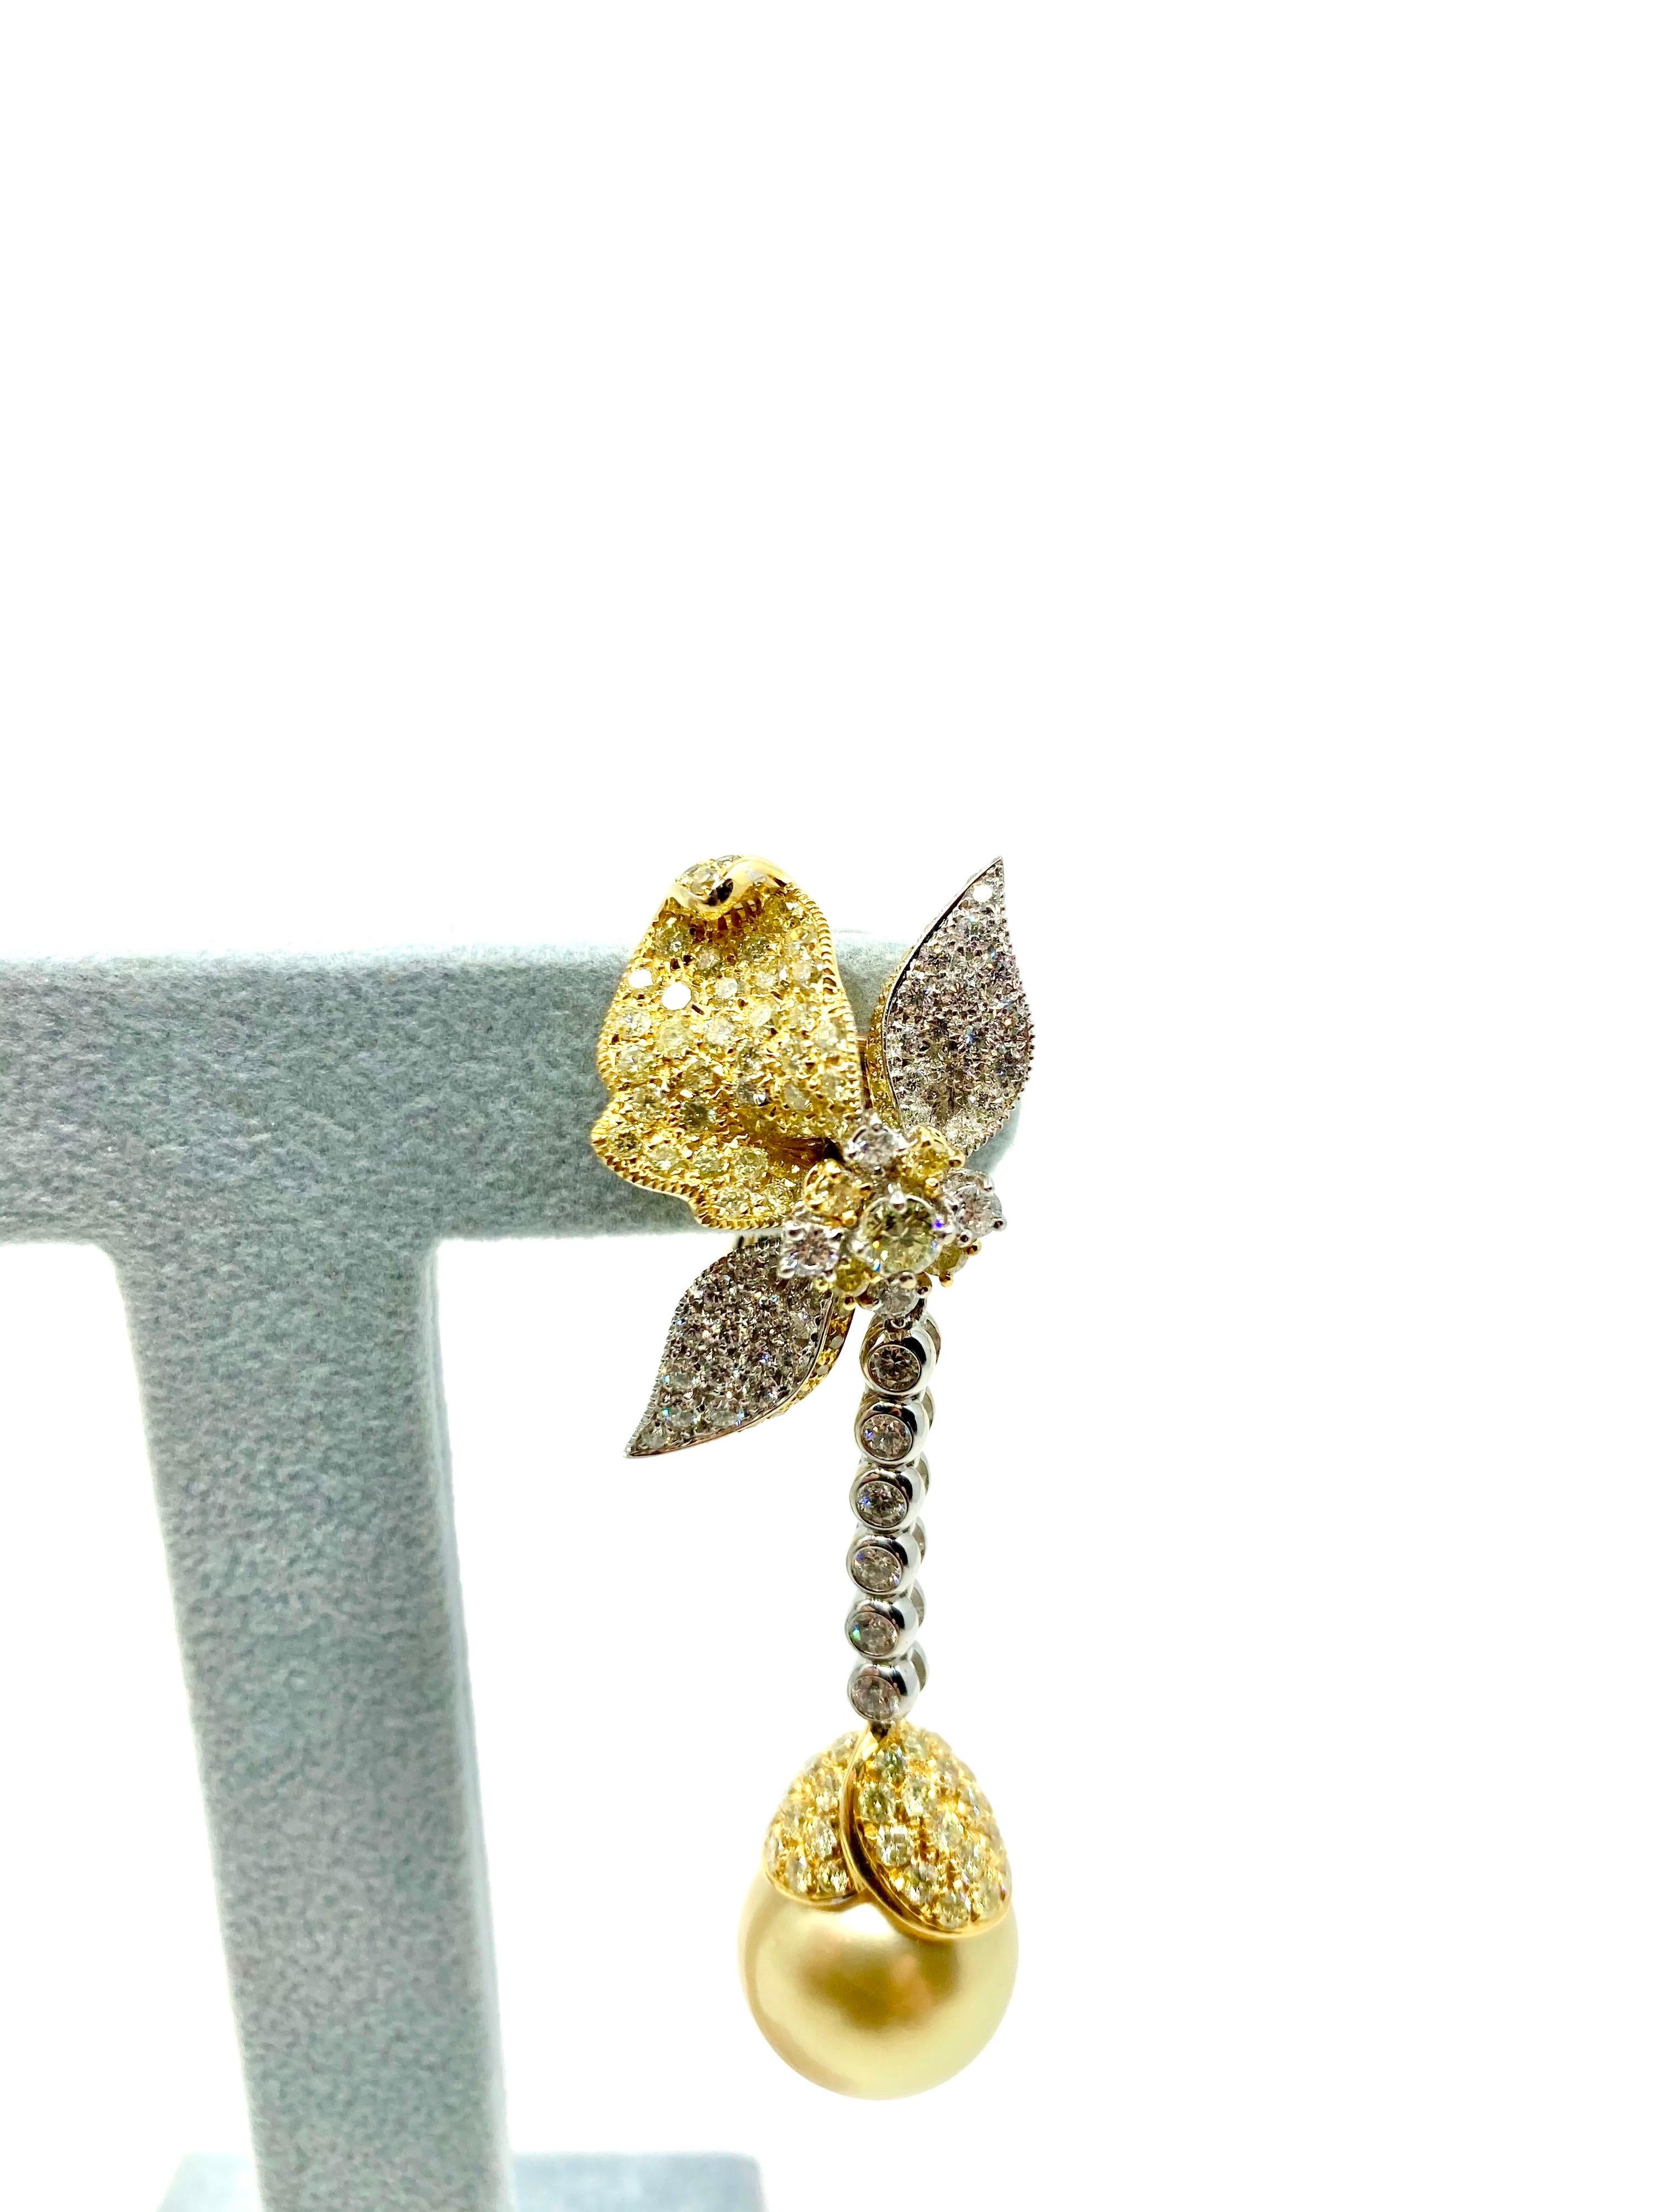 Modern 18 Karat Gold South Sea Pearls and Diamonds Earrings For Sale